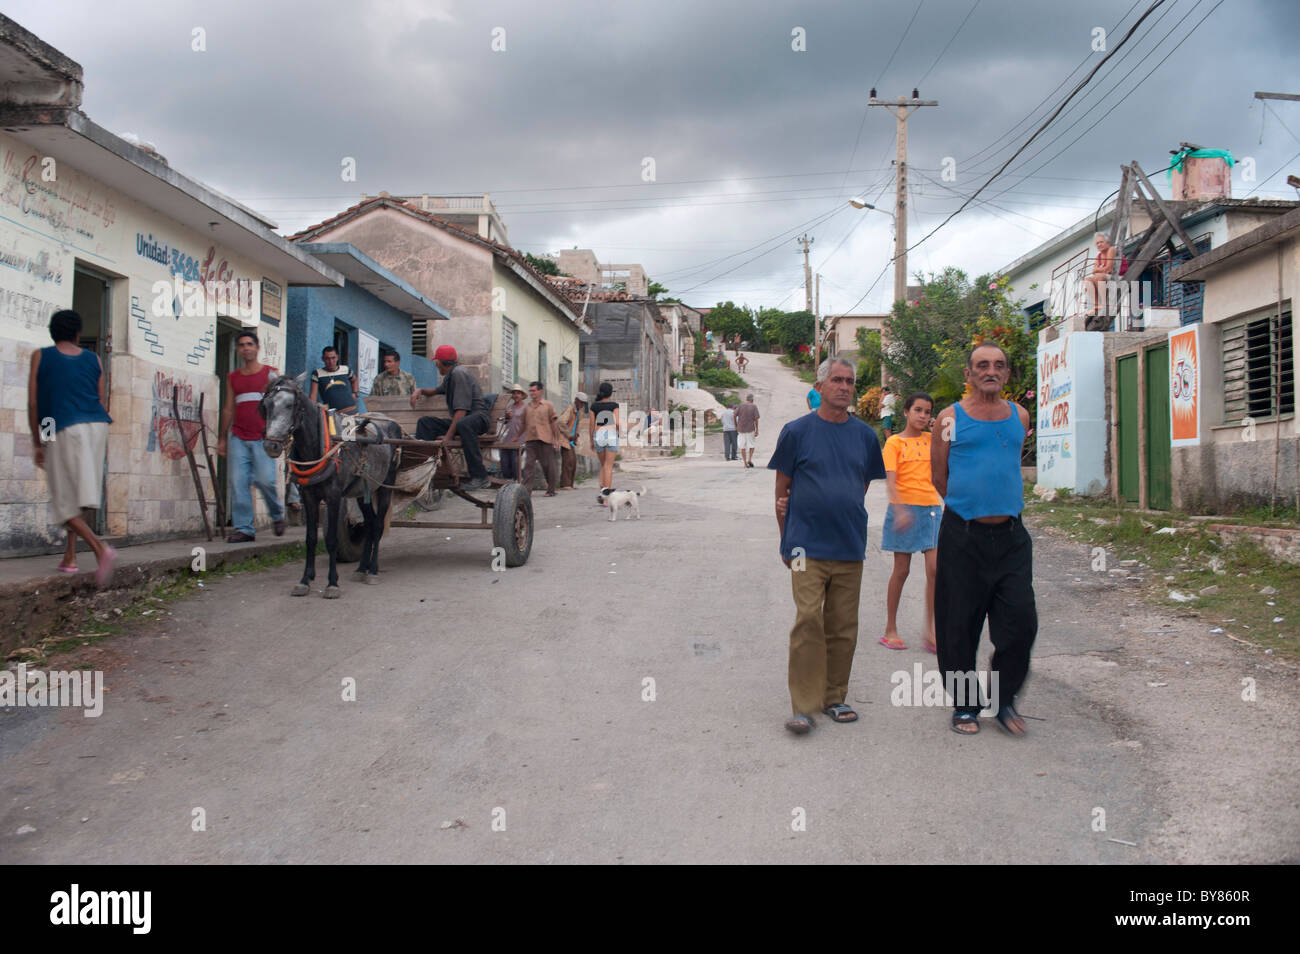 View of a typical small city 's street in Cuba with crowd, houses and horse carriage under grey sky. Stock Photo